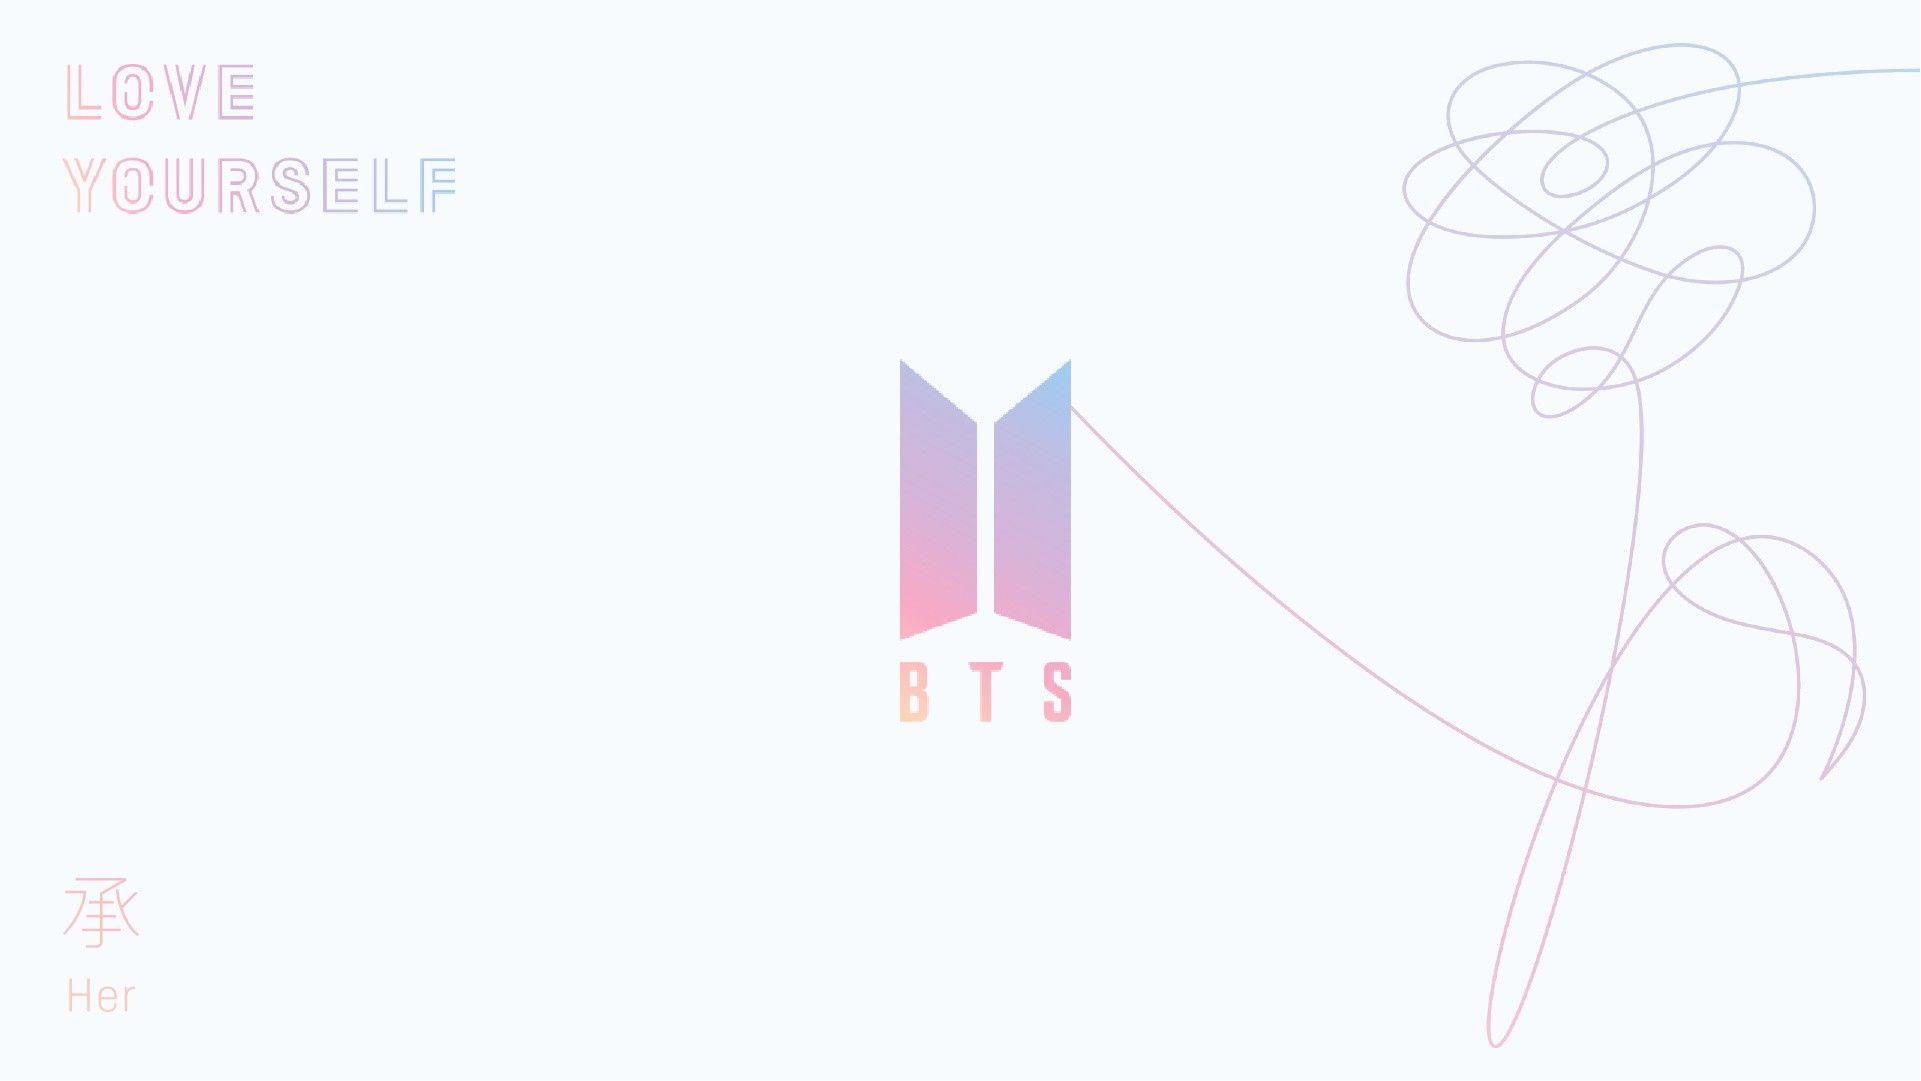 Bts Logo Pc Wallpapers Top Free Bts Logo Pc Backgrounds Wallpaperaccess